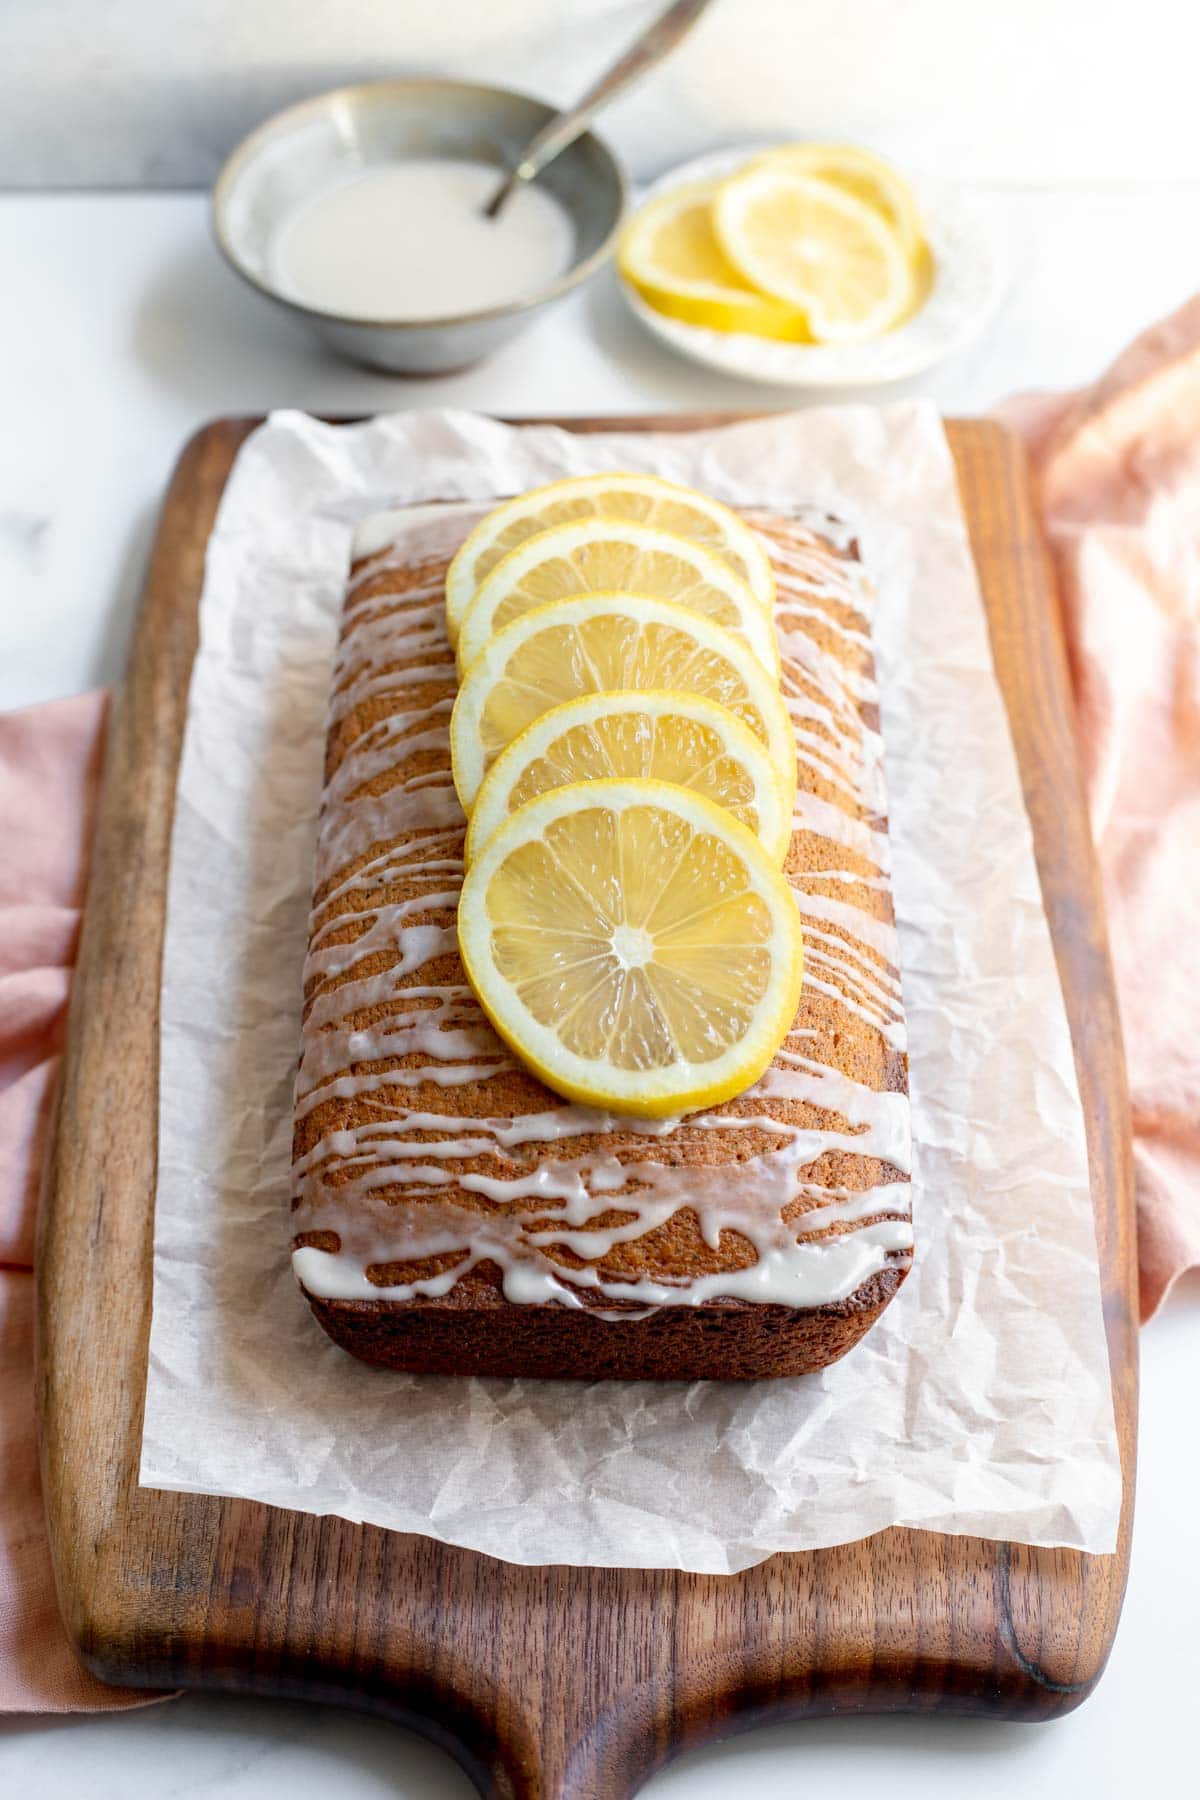 Earl Grey and lemon loaf cake on a cutting board lined with parchment paper in front of a bowl of glaze and a plate of cut lemons